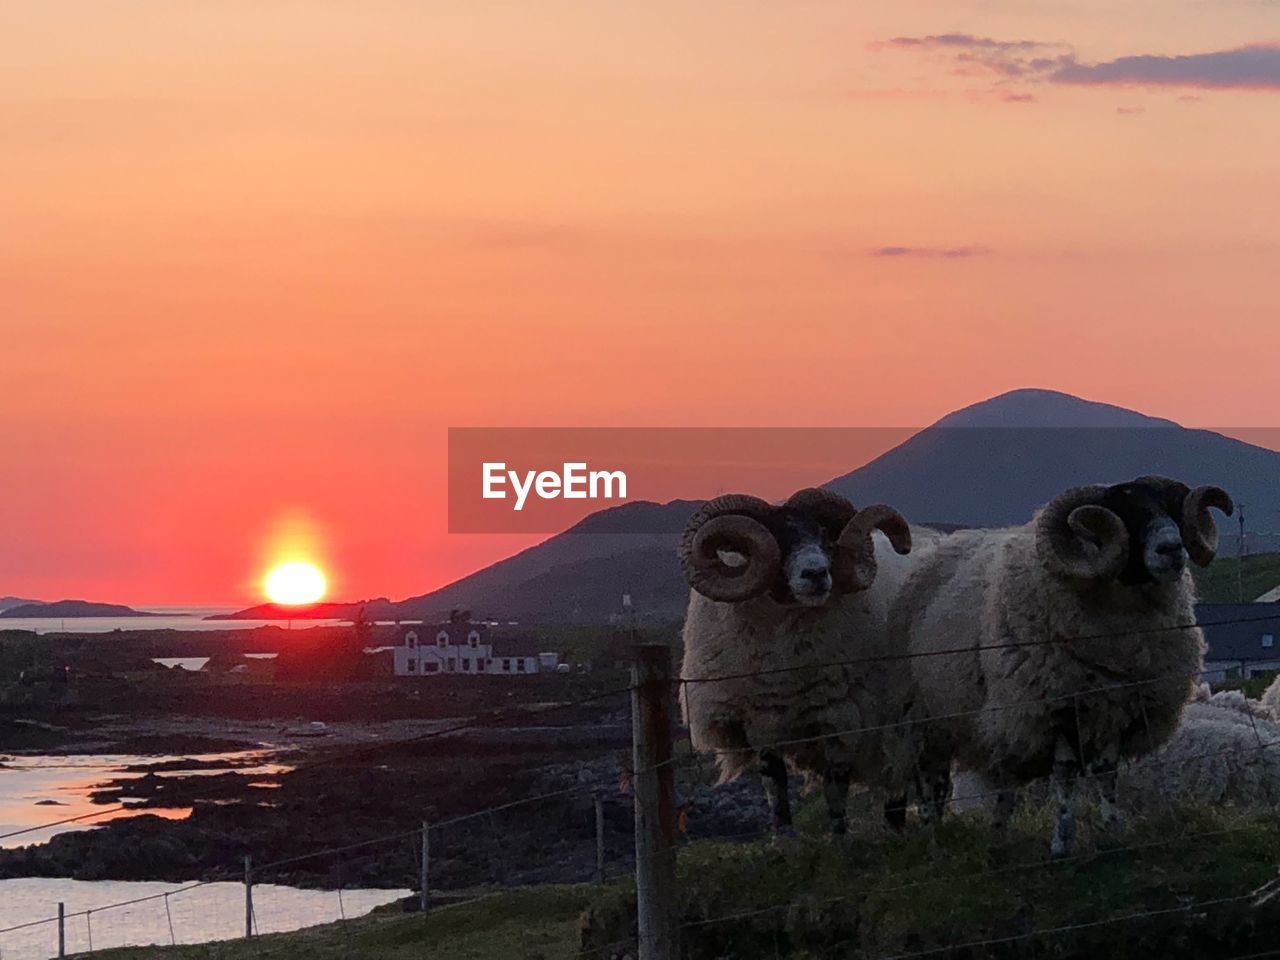 VIEW OF SHEEP ON MOUNTAIN AGAINST ORANGE SKY